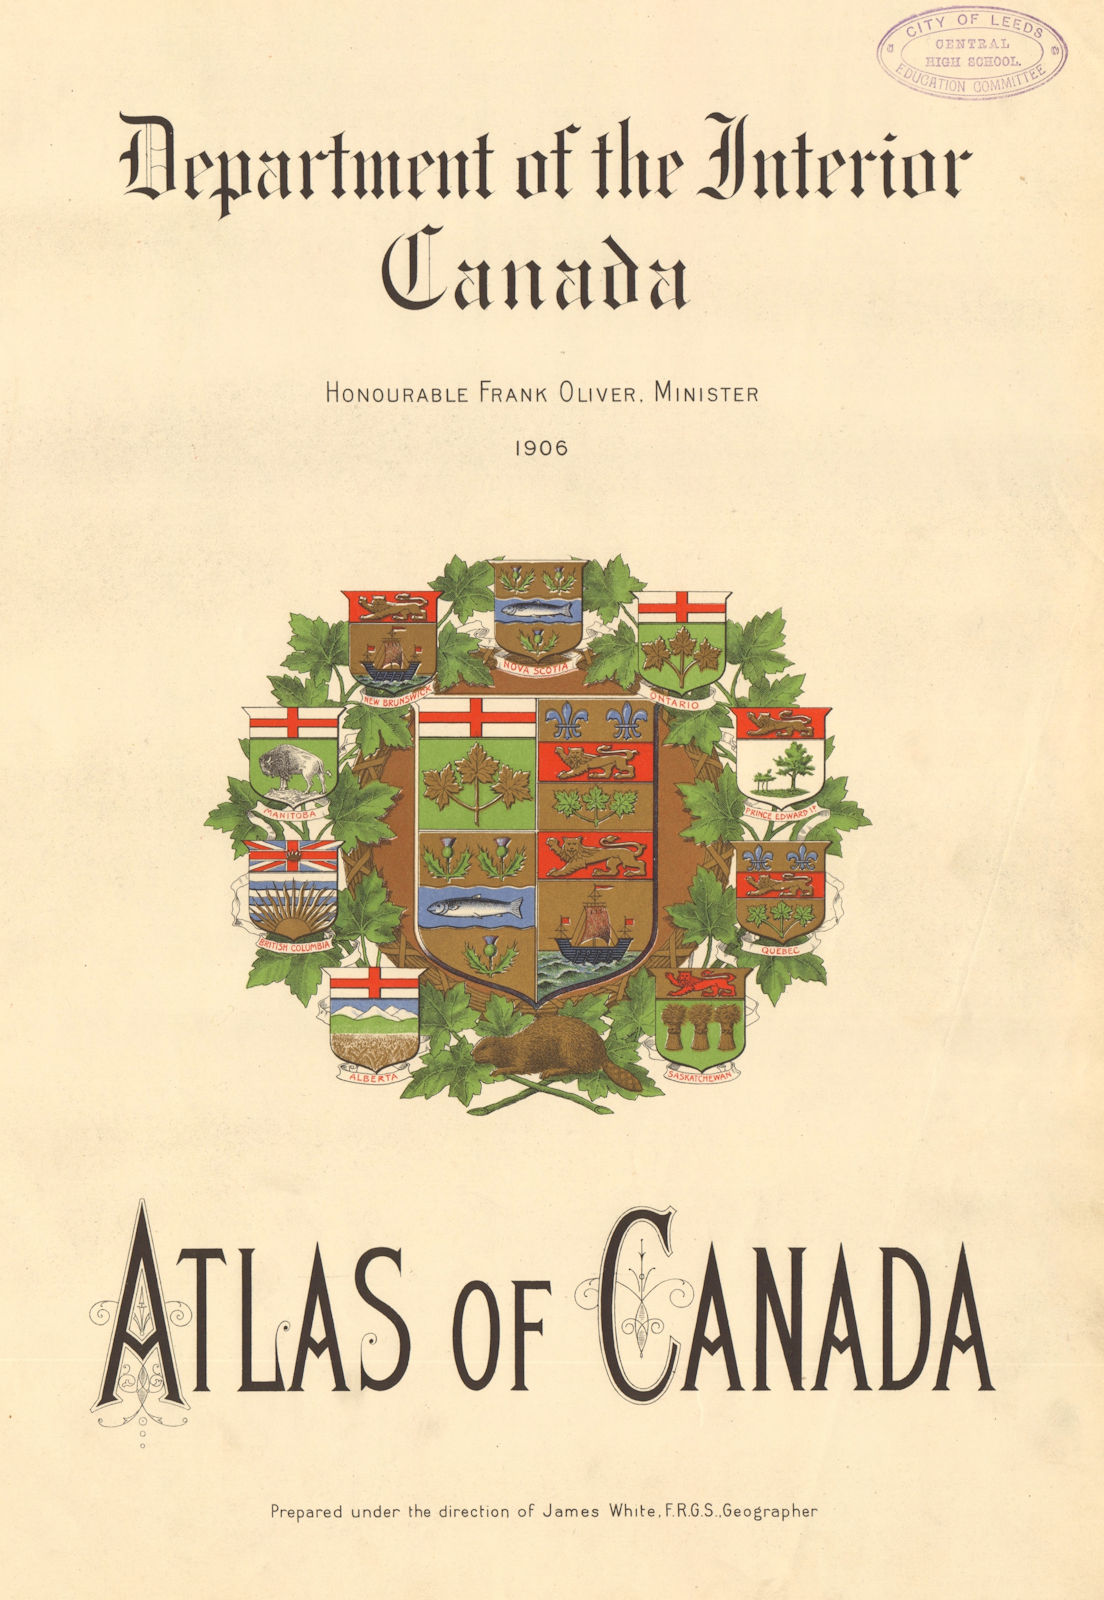 Associate Product ATLAS OF CANADA. Decorative title page. James White 1906 old antique print